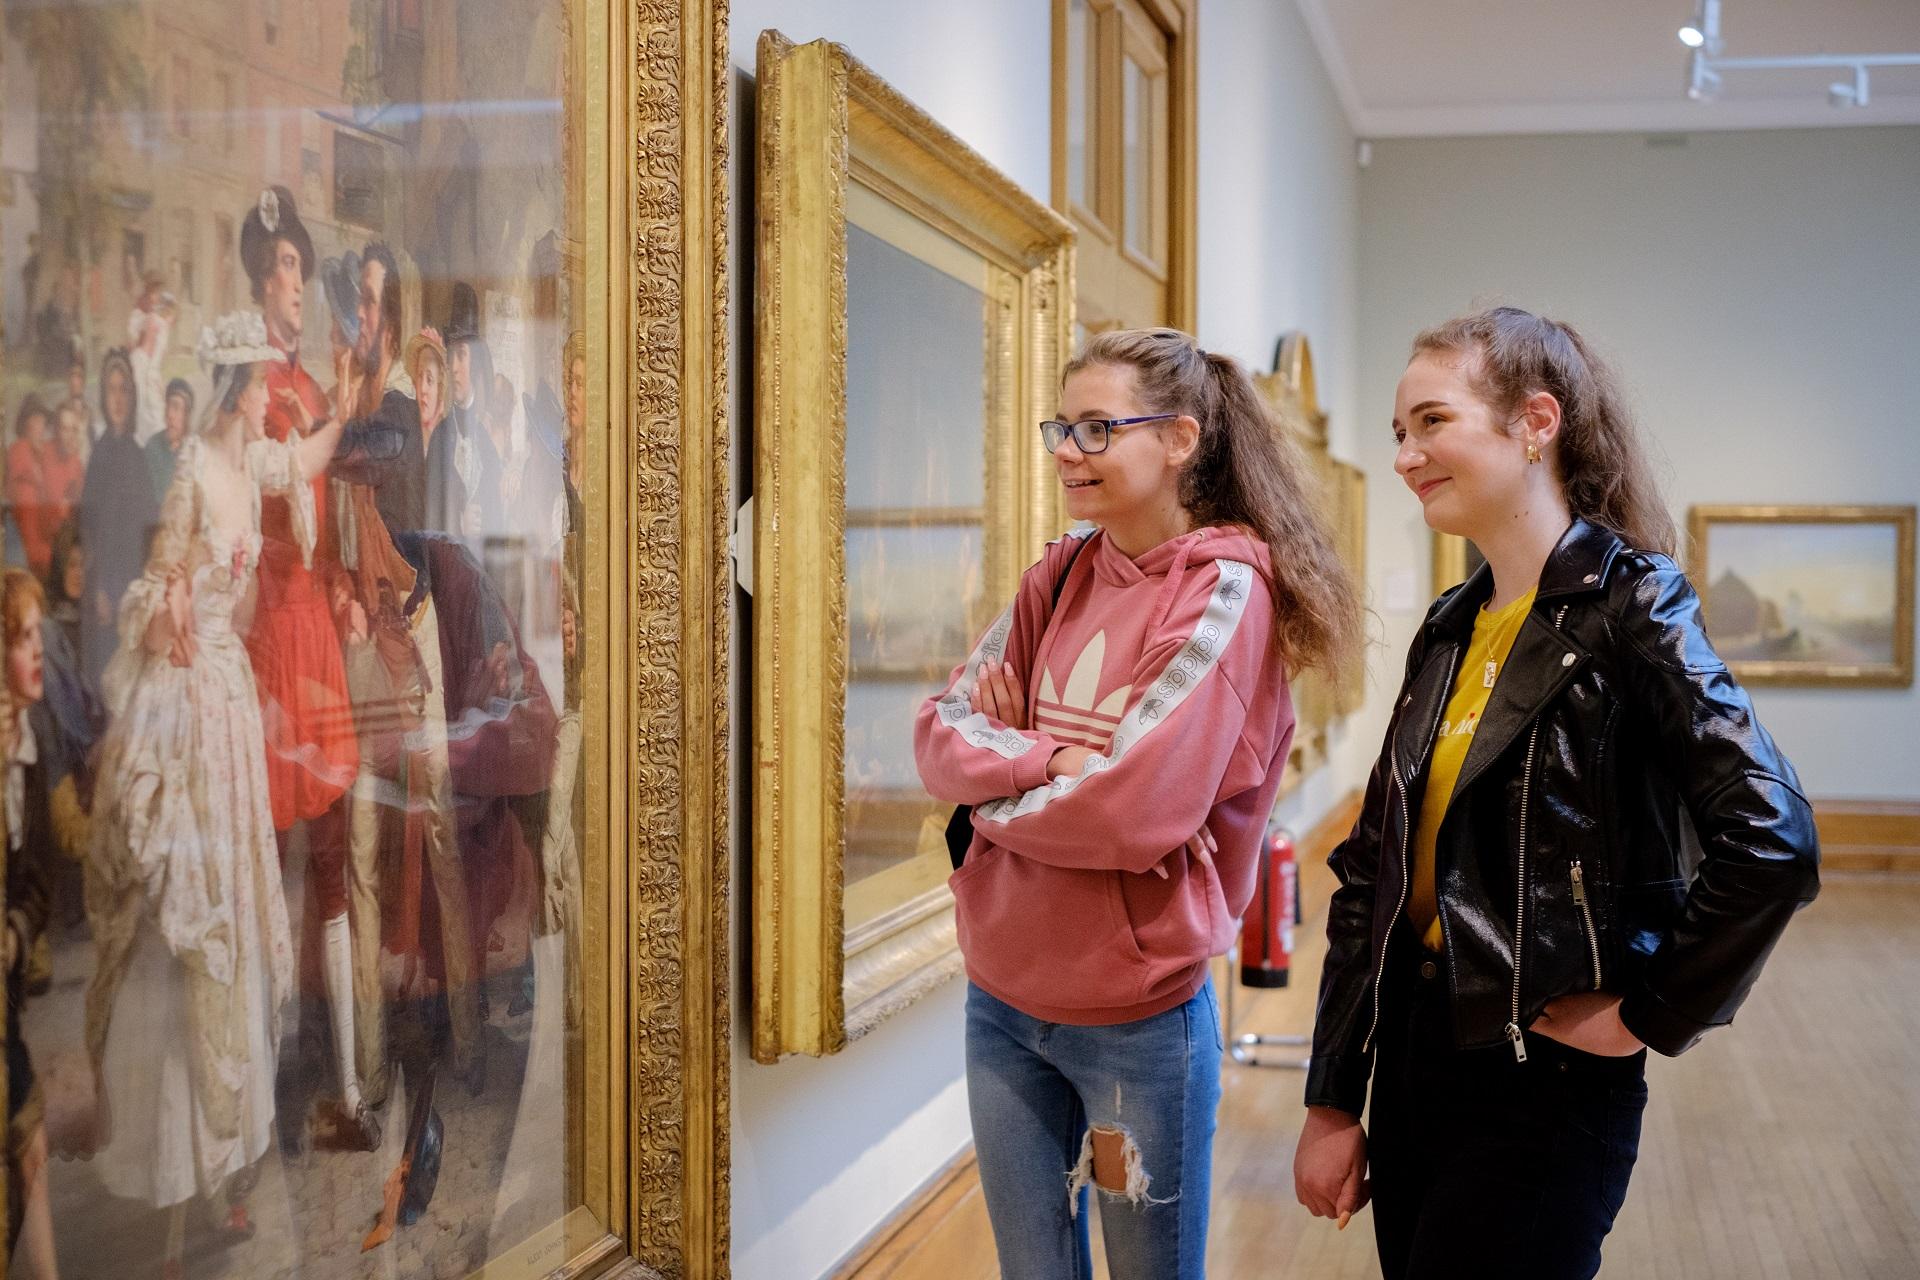 Two women looking at a large painting in an art gallery.